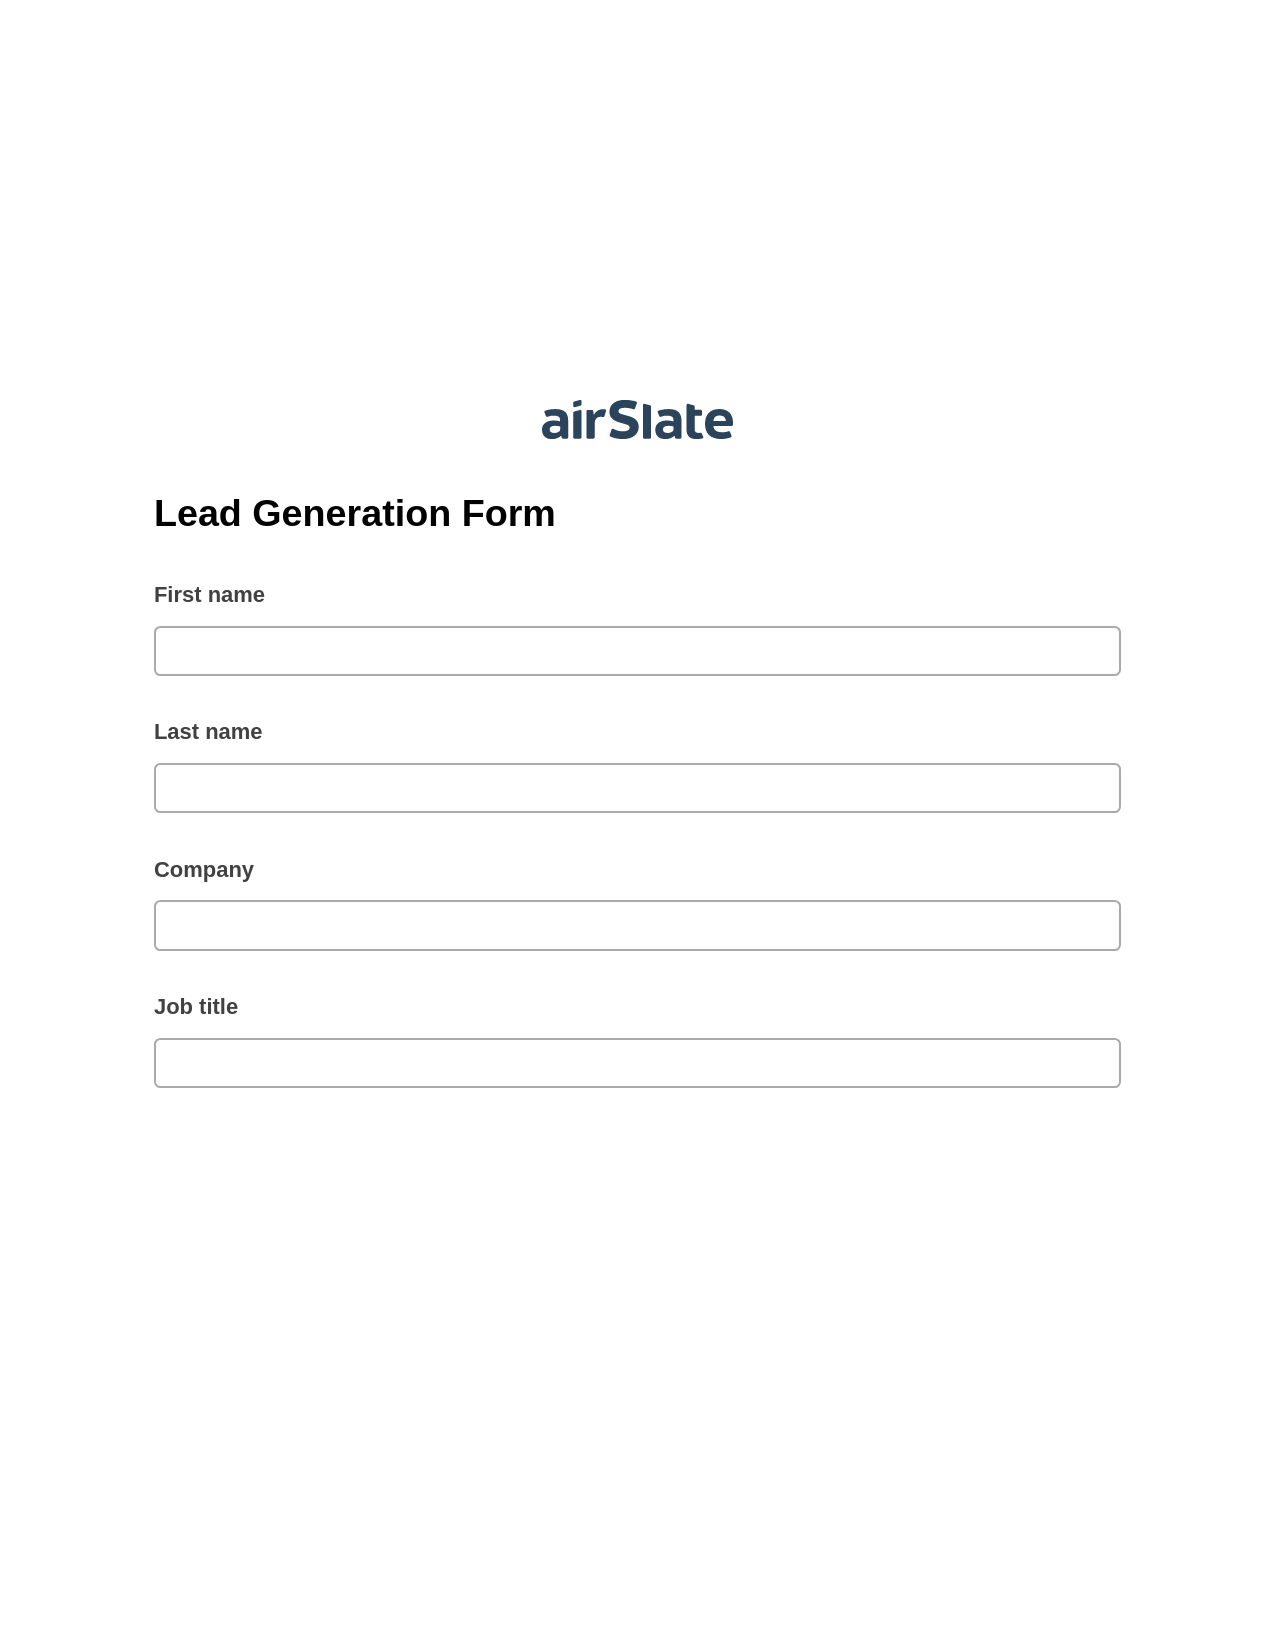 Lead Generation Form Pre-fill from Google Sheets Bot, Slack Notification Bot, Email Notification Postfinish Bot